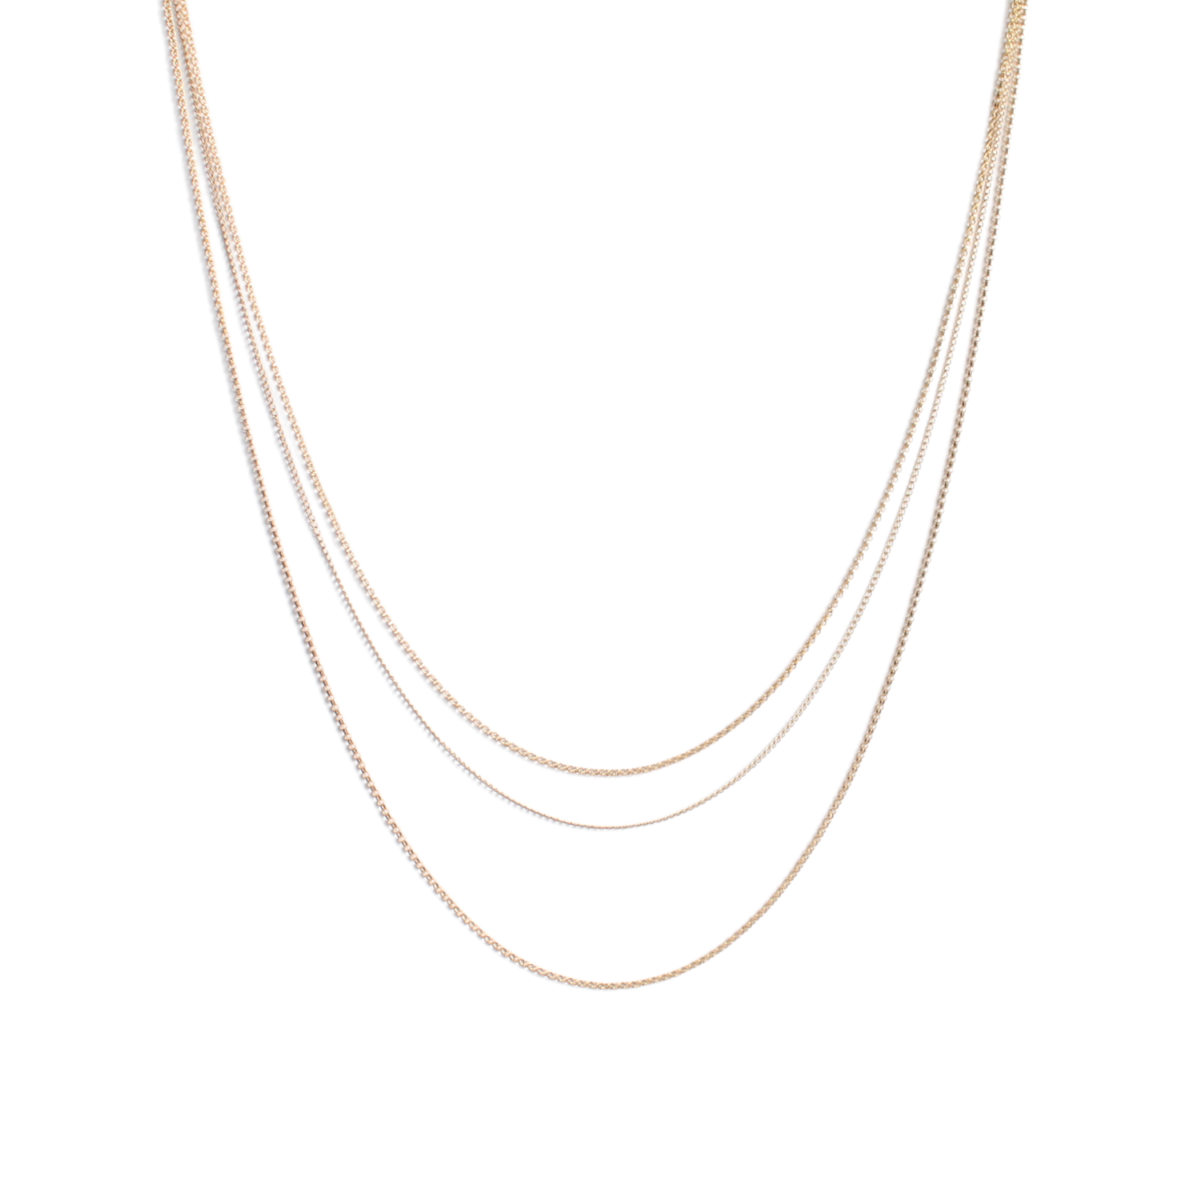 https://looklocal.ca/shop/wp-content/themes/local/uploads/2022/01/4579__TripleLayeredNecklace.png